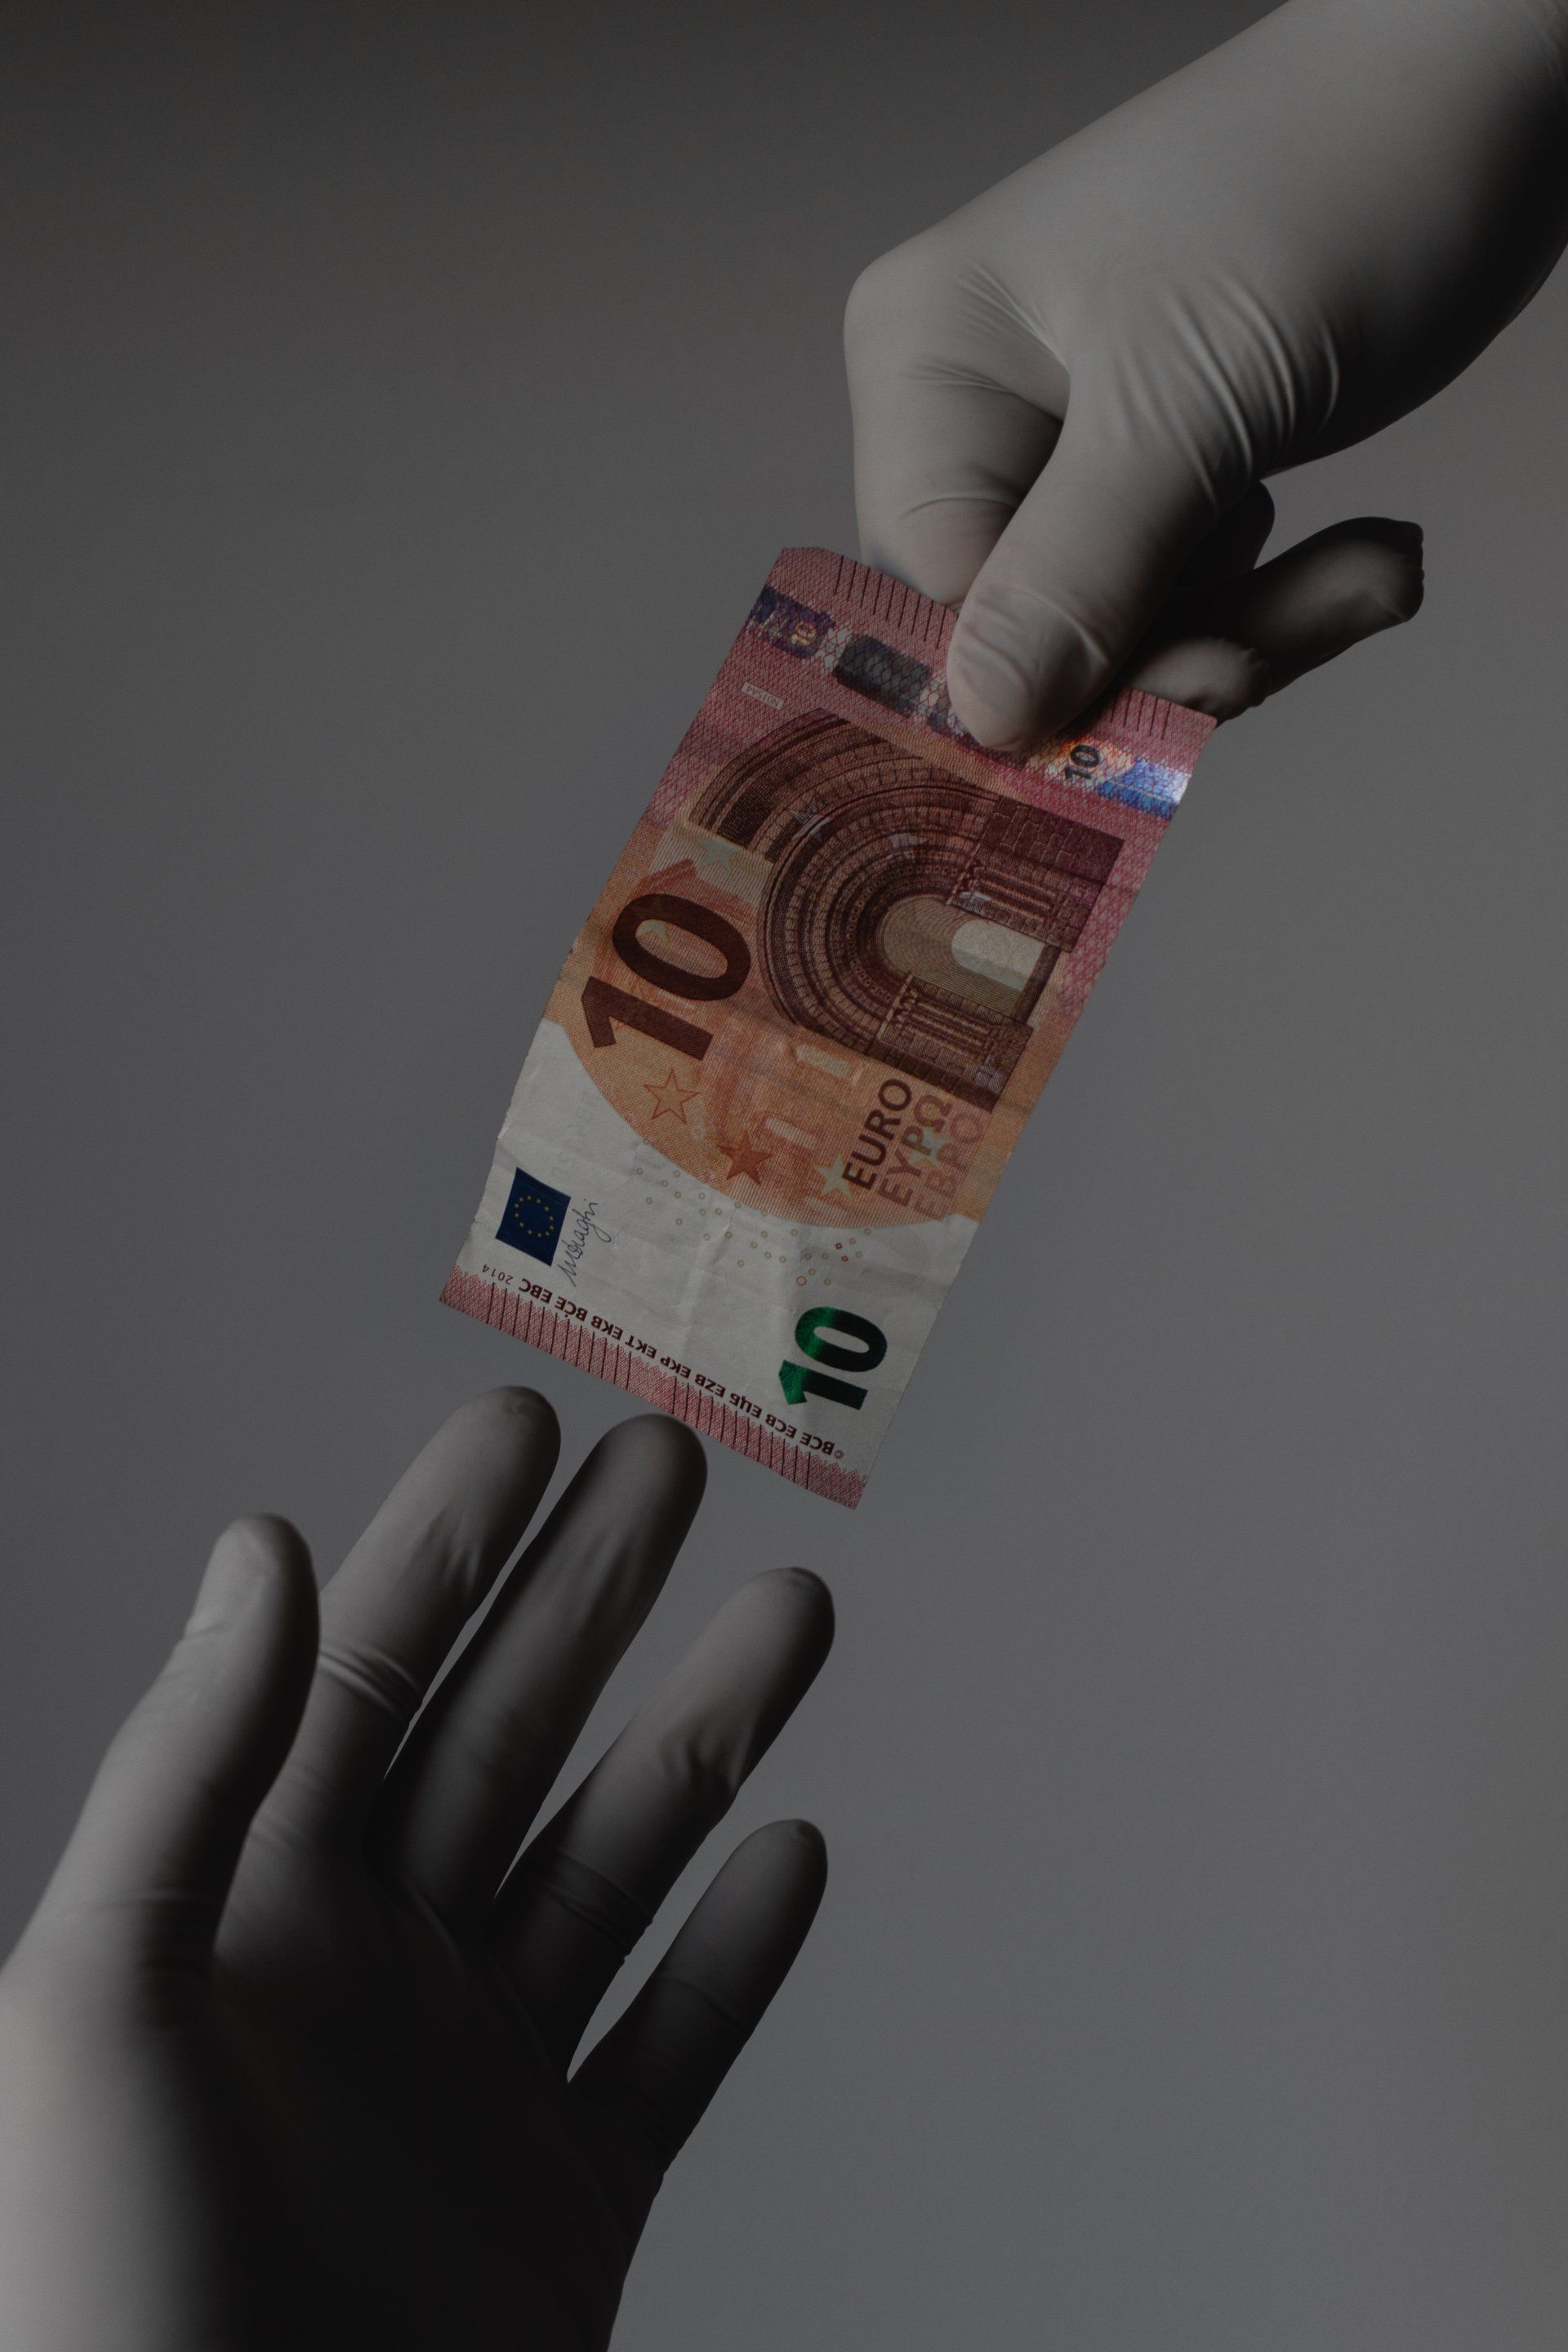 A gloved hand holding a stack of money, representing payment strategies in the construction industry